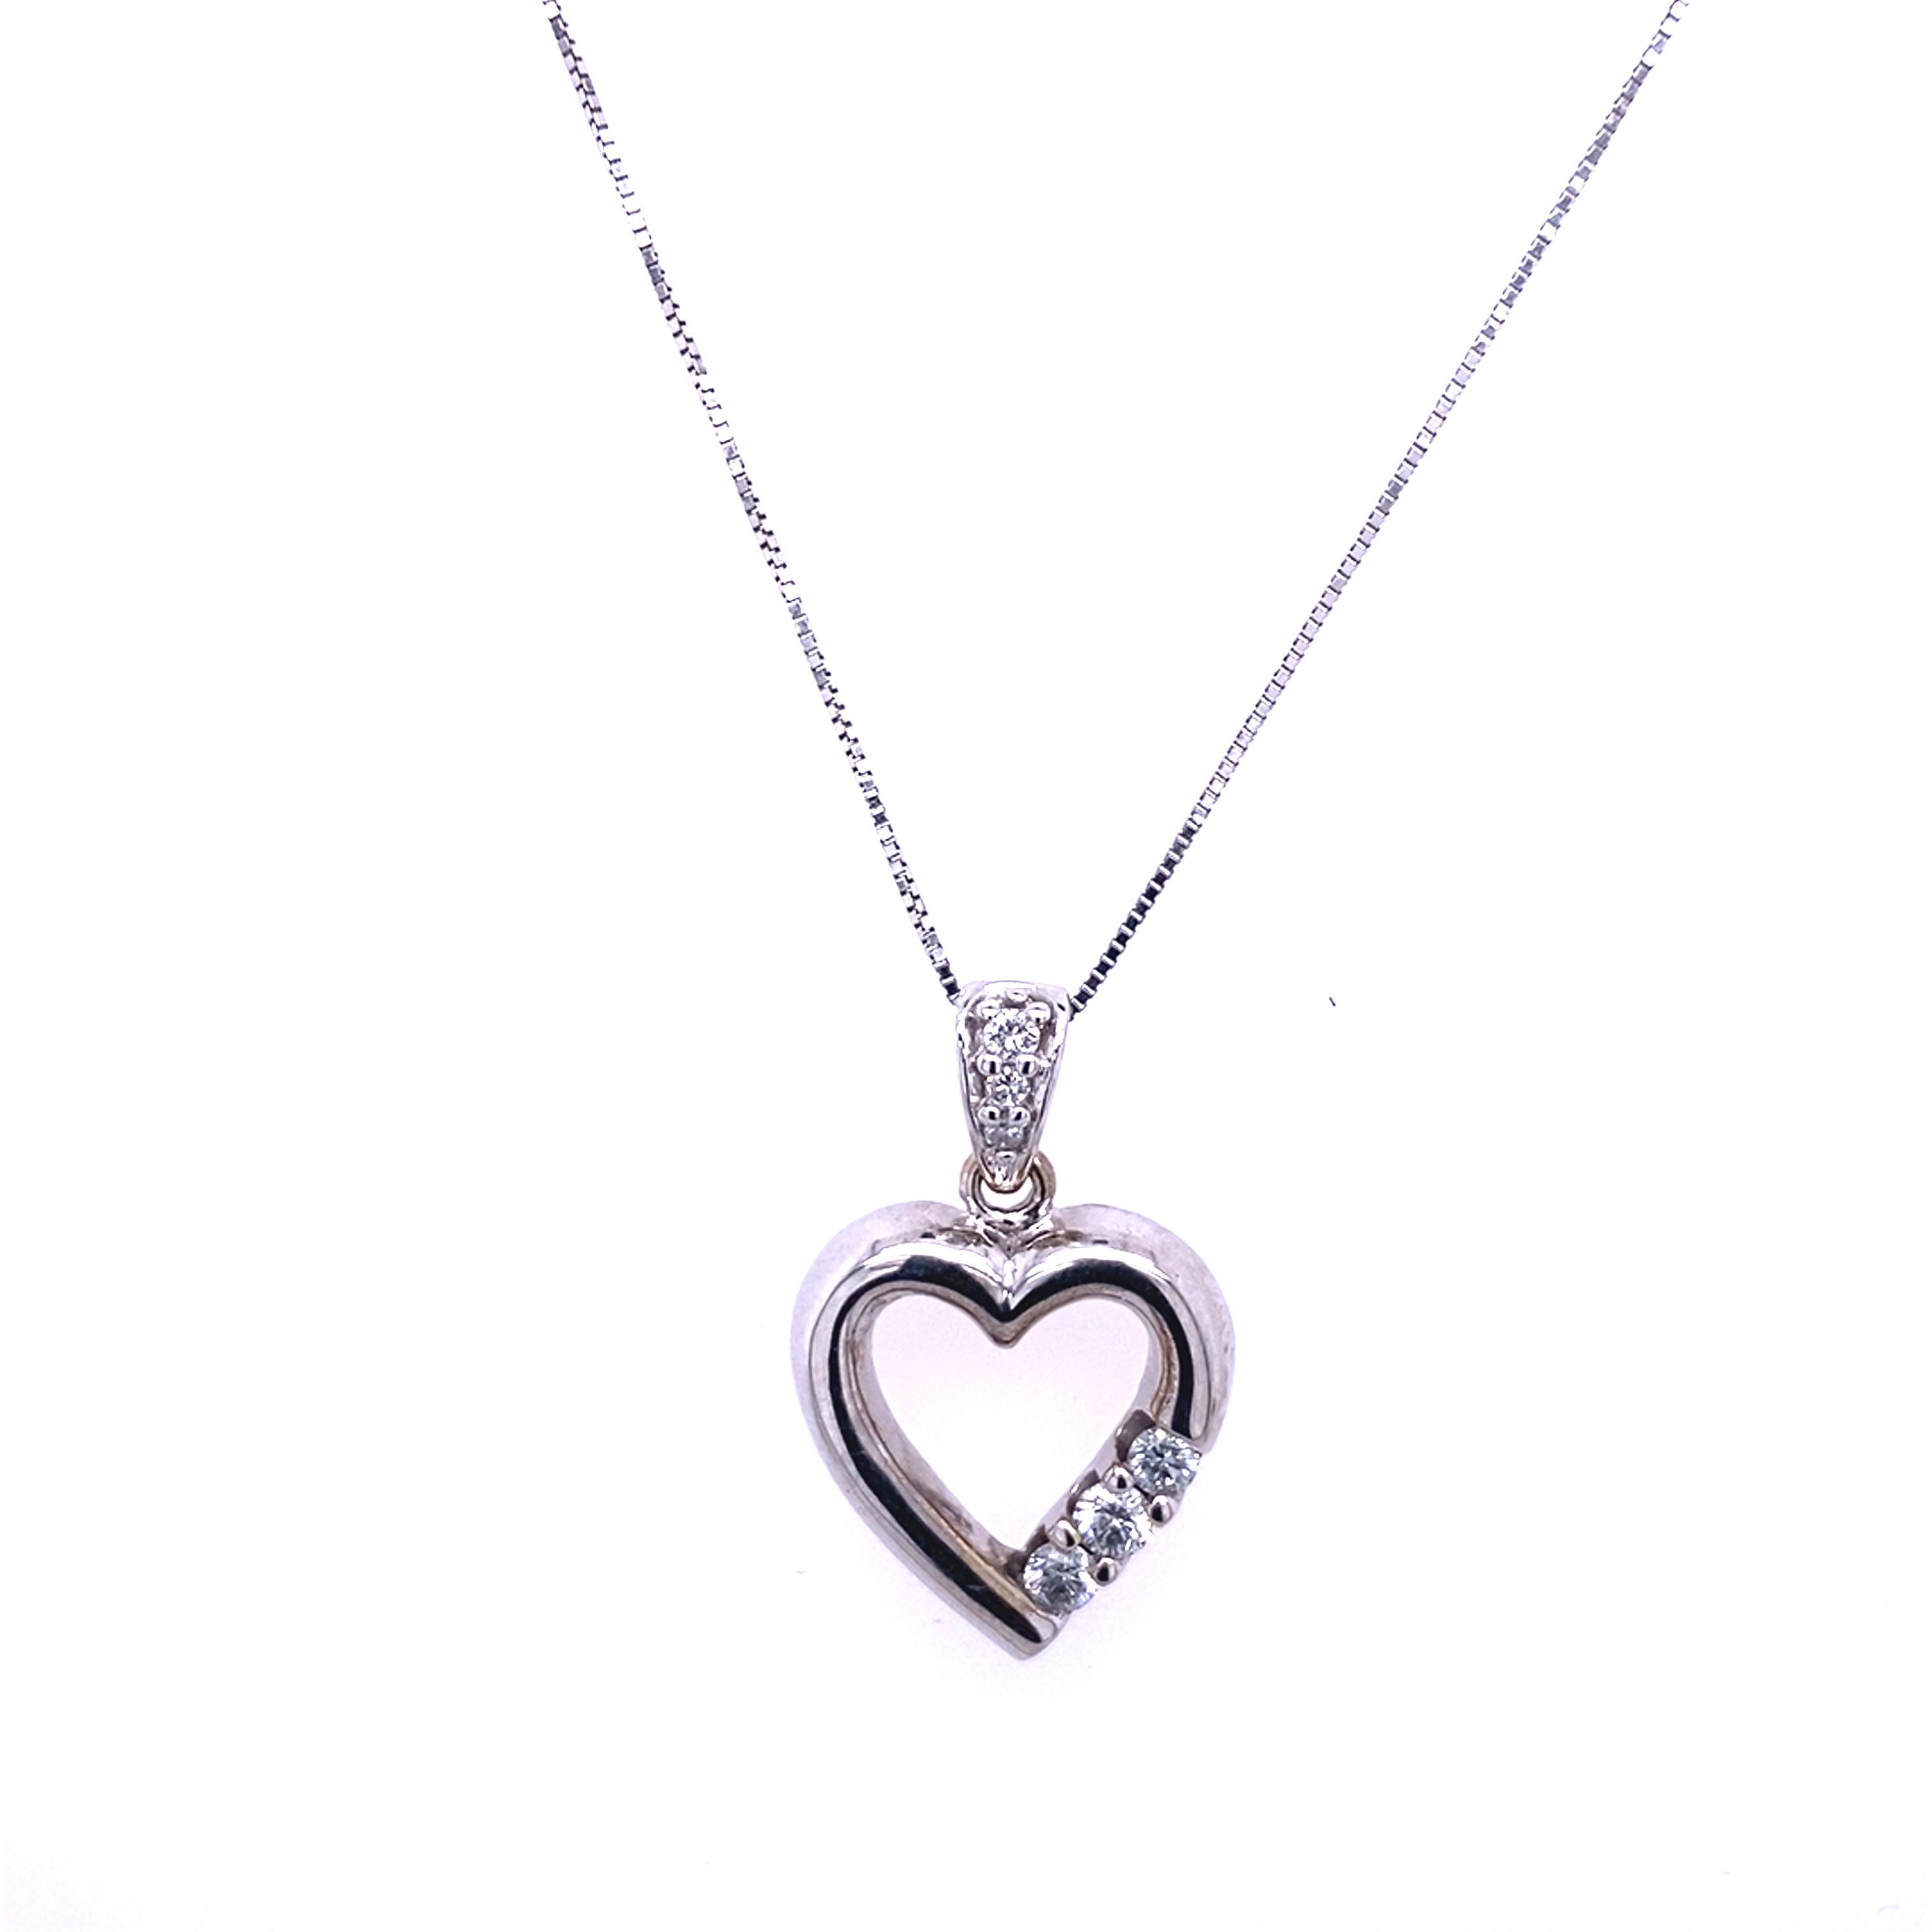 Solid 14ct White Gold Diamond Heart Pendant on White Gold Chain In Excellent Condition For Sale In London, GB